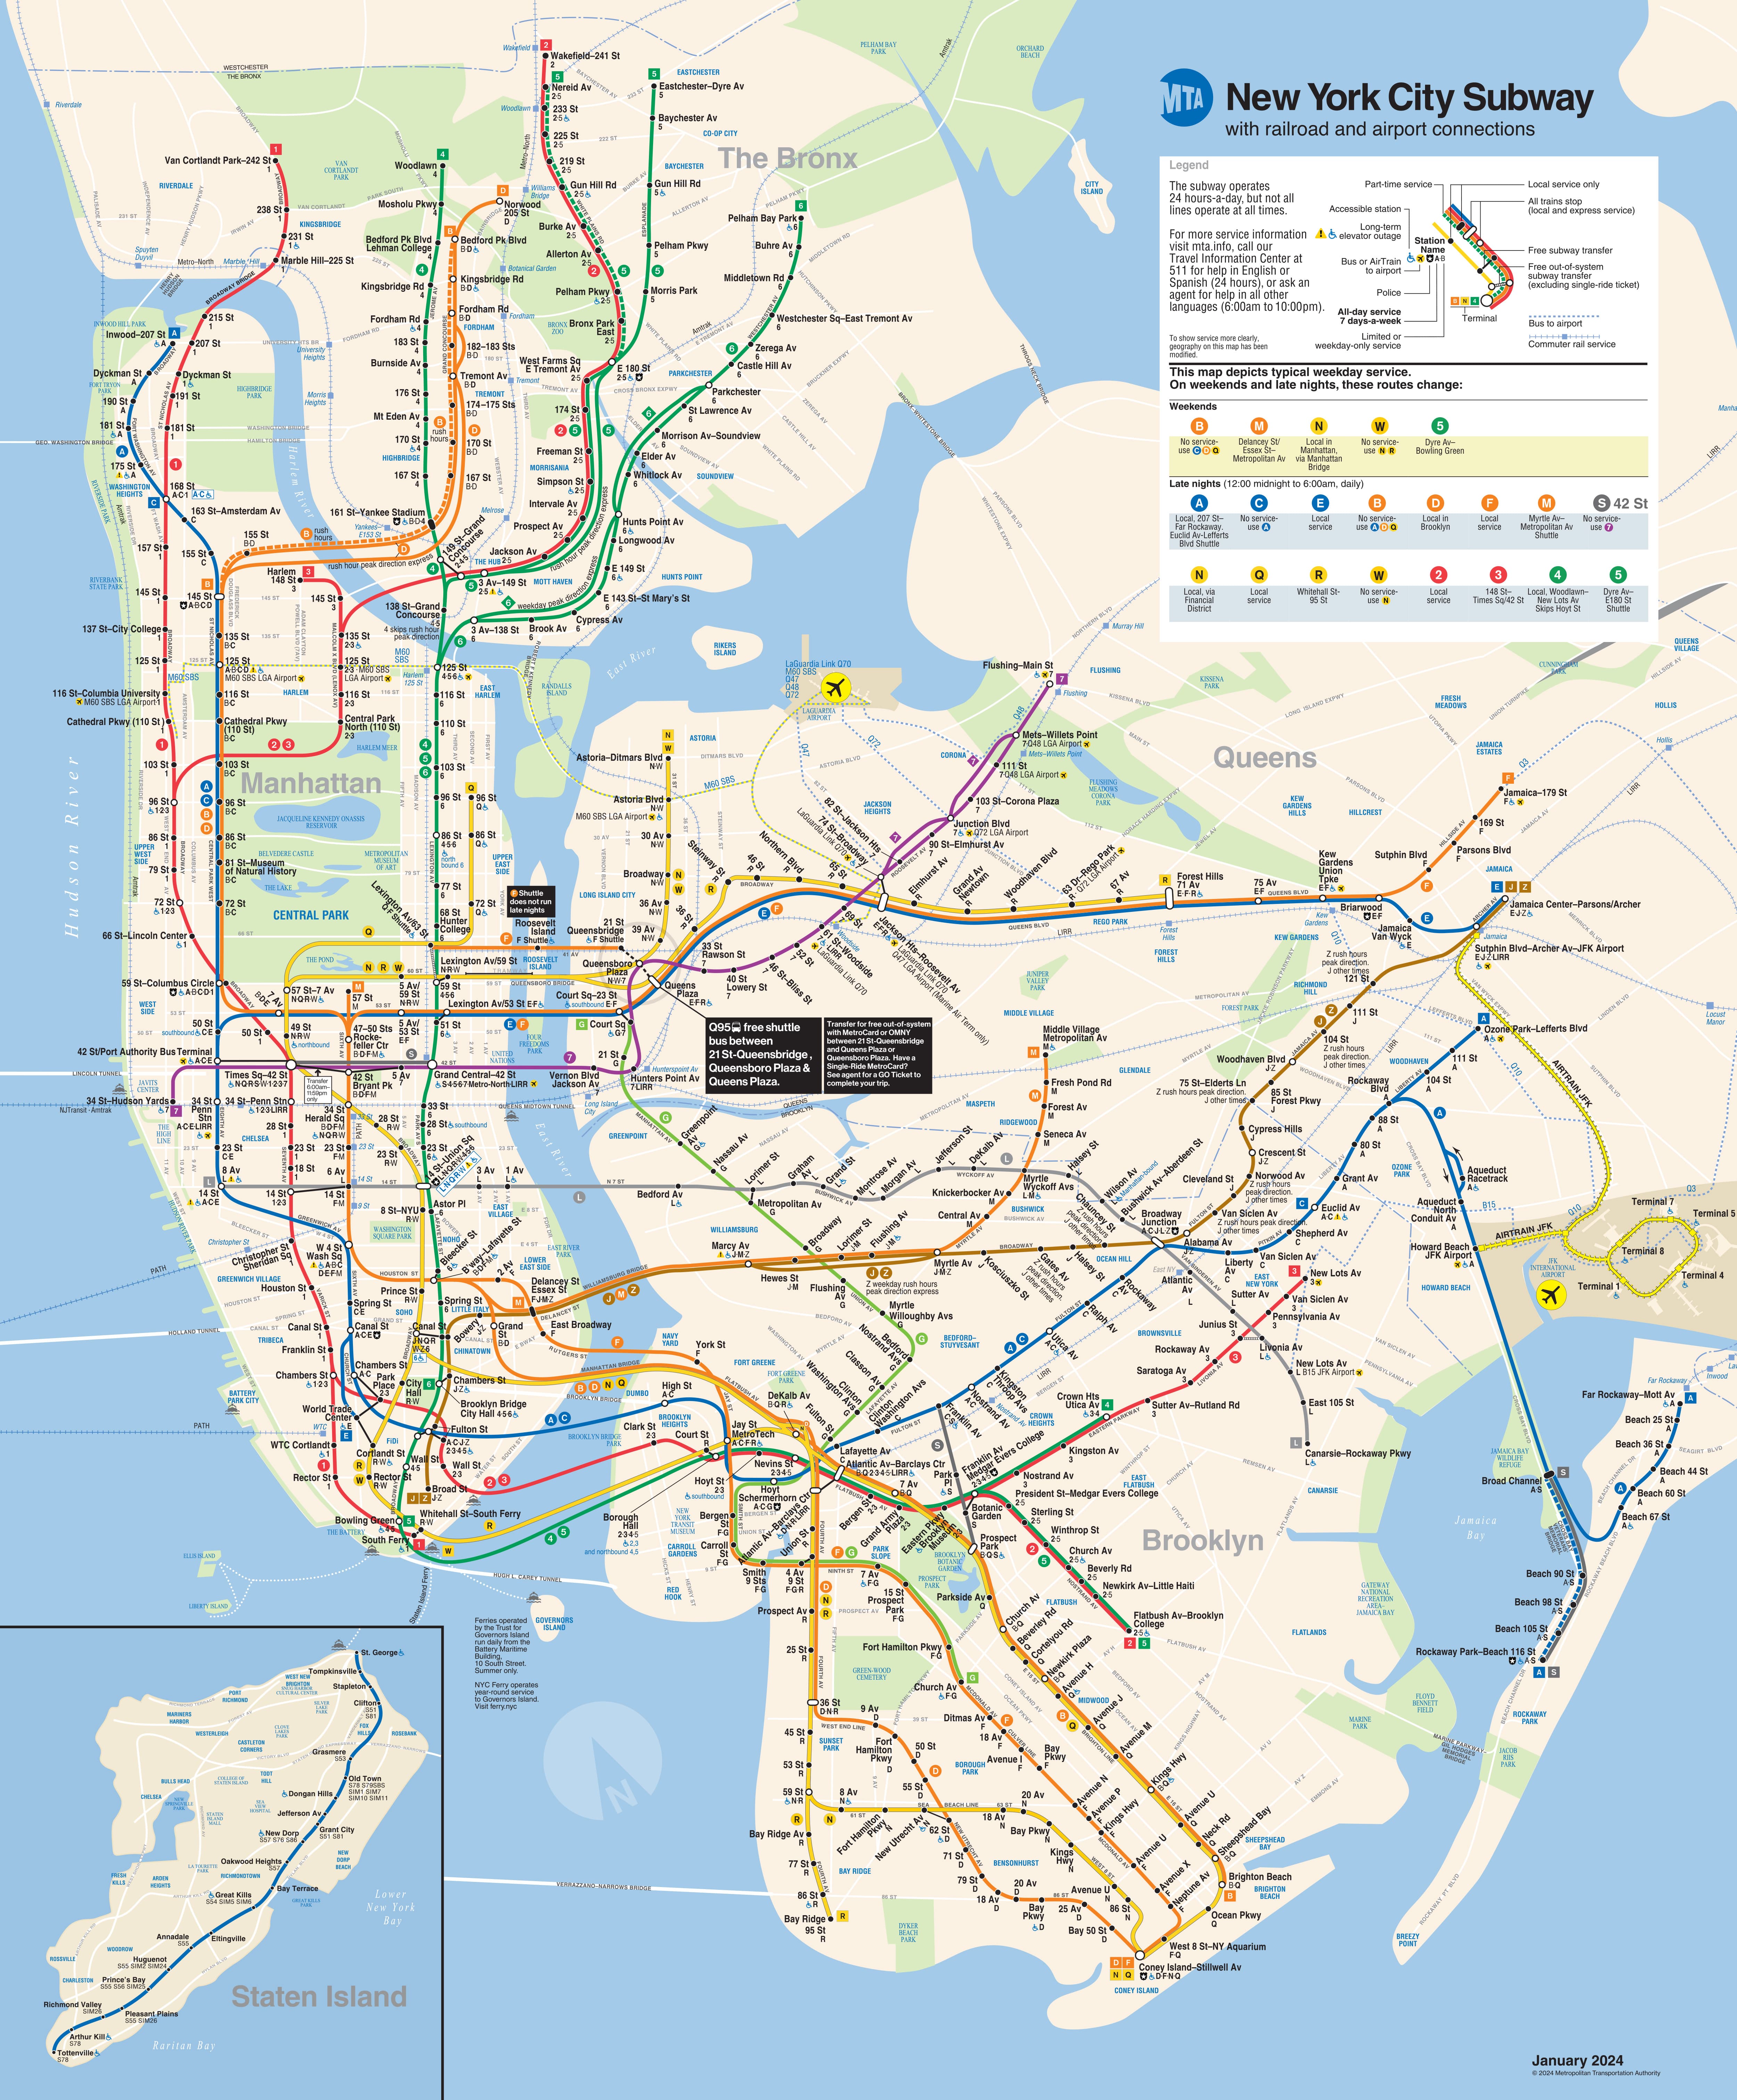 NYC Subway Guide - Understanding the NYC Subway Map